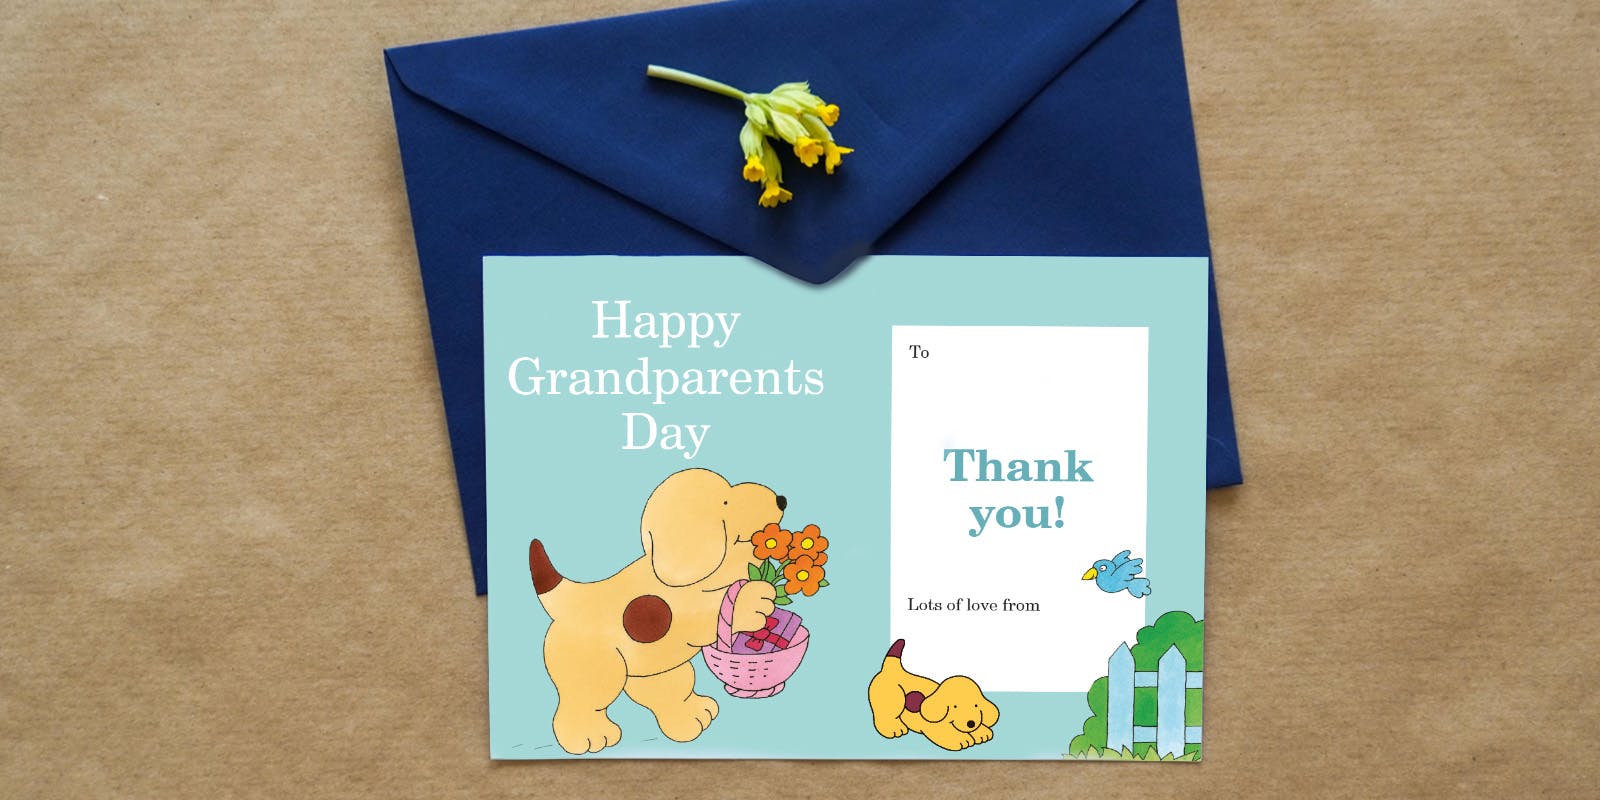 Print a free card for Grandparents’ Day